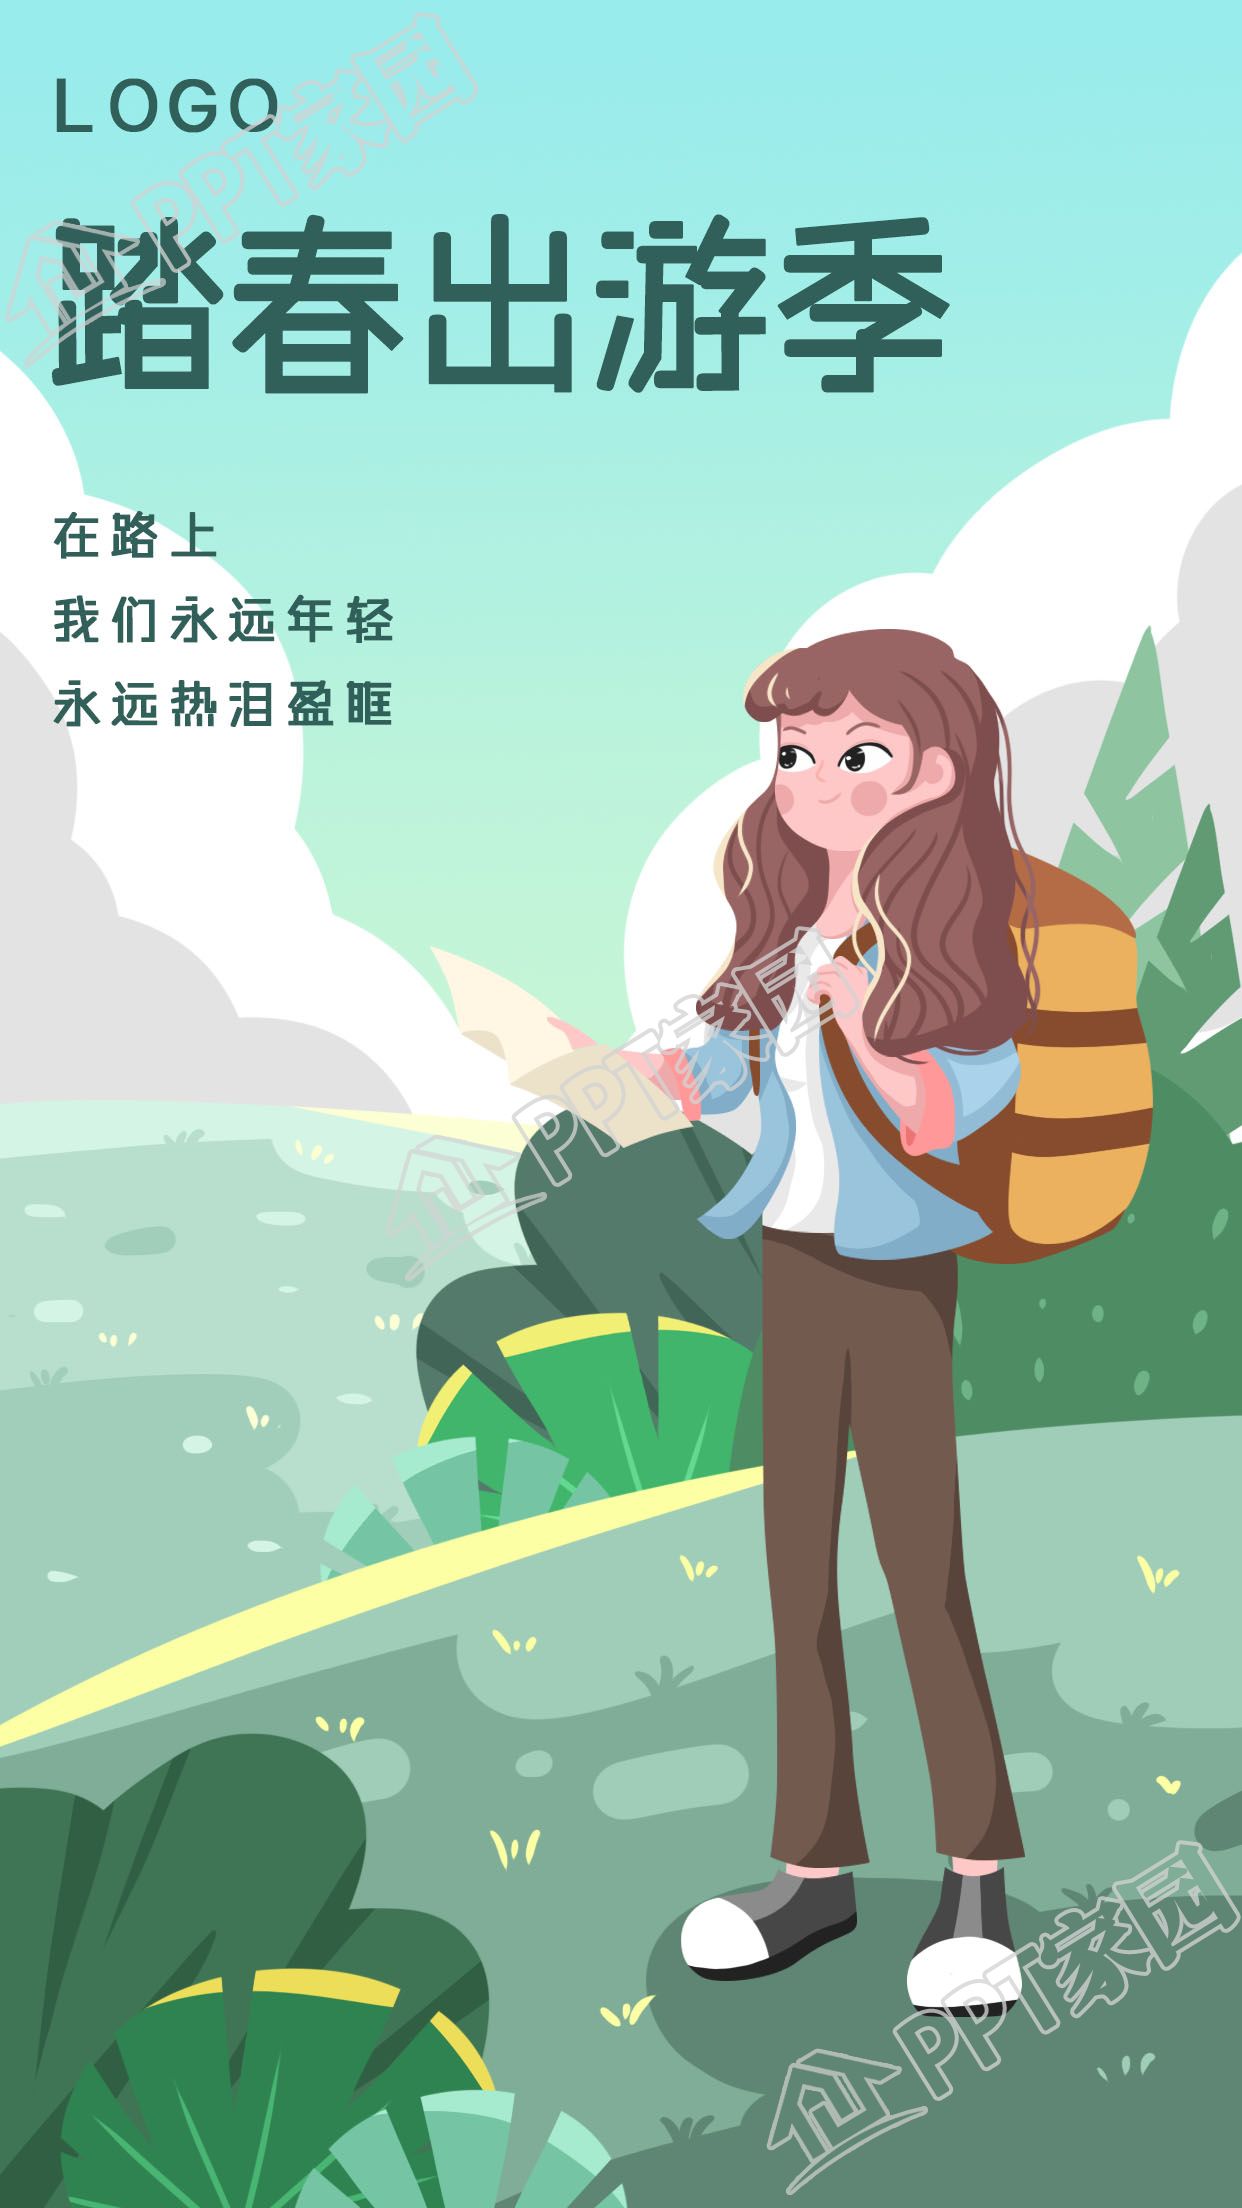 Spring outing season backpack spring outing cartoon picture mobile poster download recommended